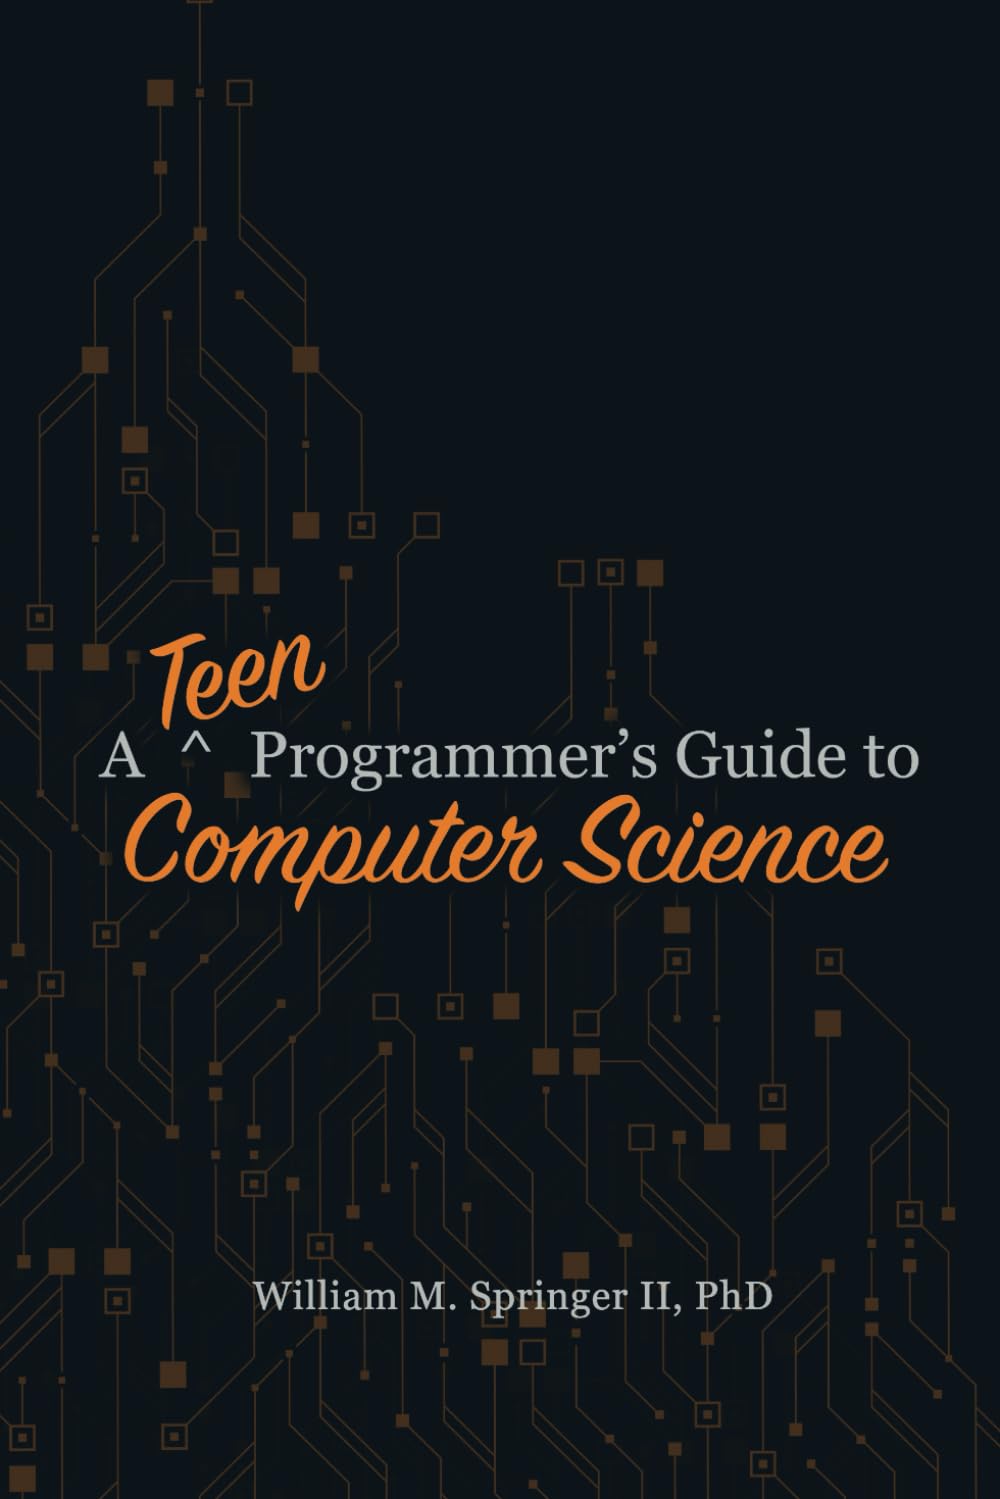 A Teen Programmer's Guide to Computer Science (A Programmer's Guide to Computer Science)